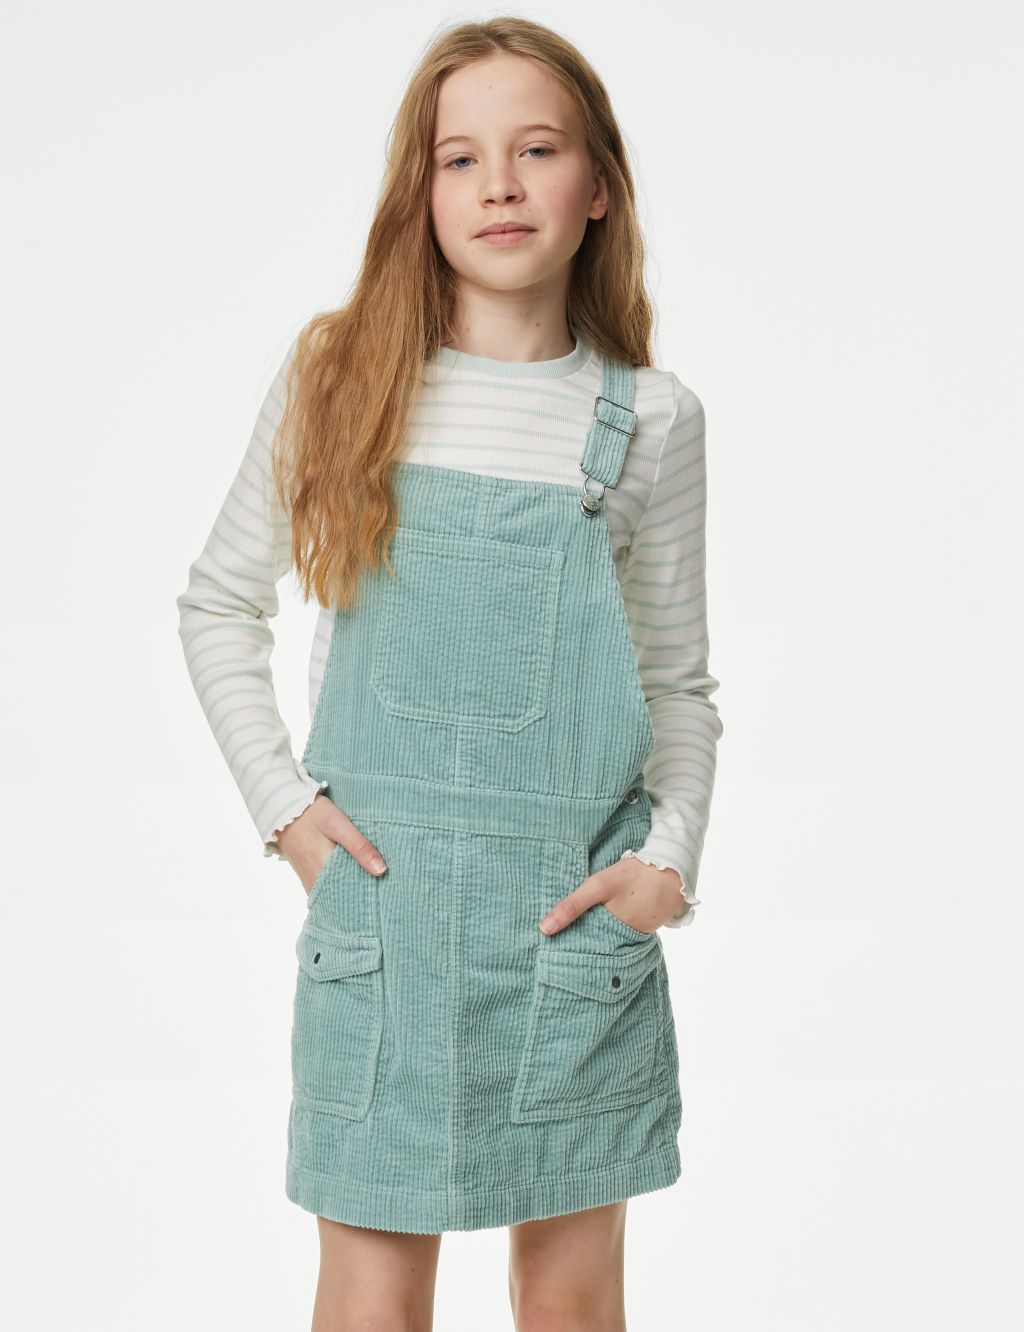 2pc Cotton Rich Striped Pinafore Outfit (6-16 Yrs)